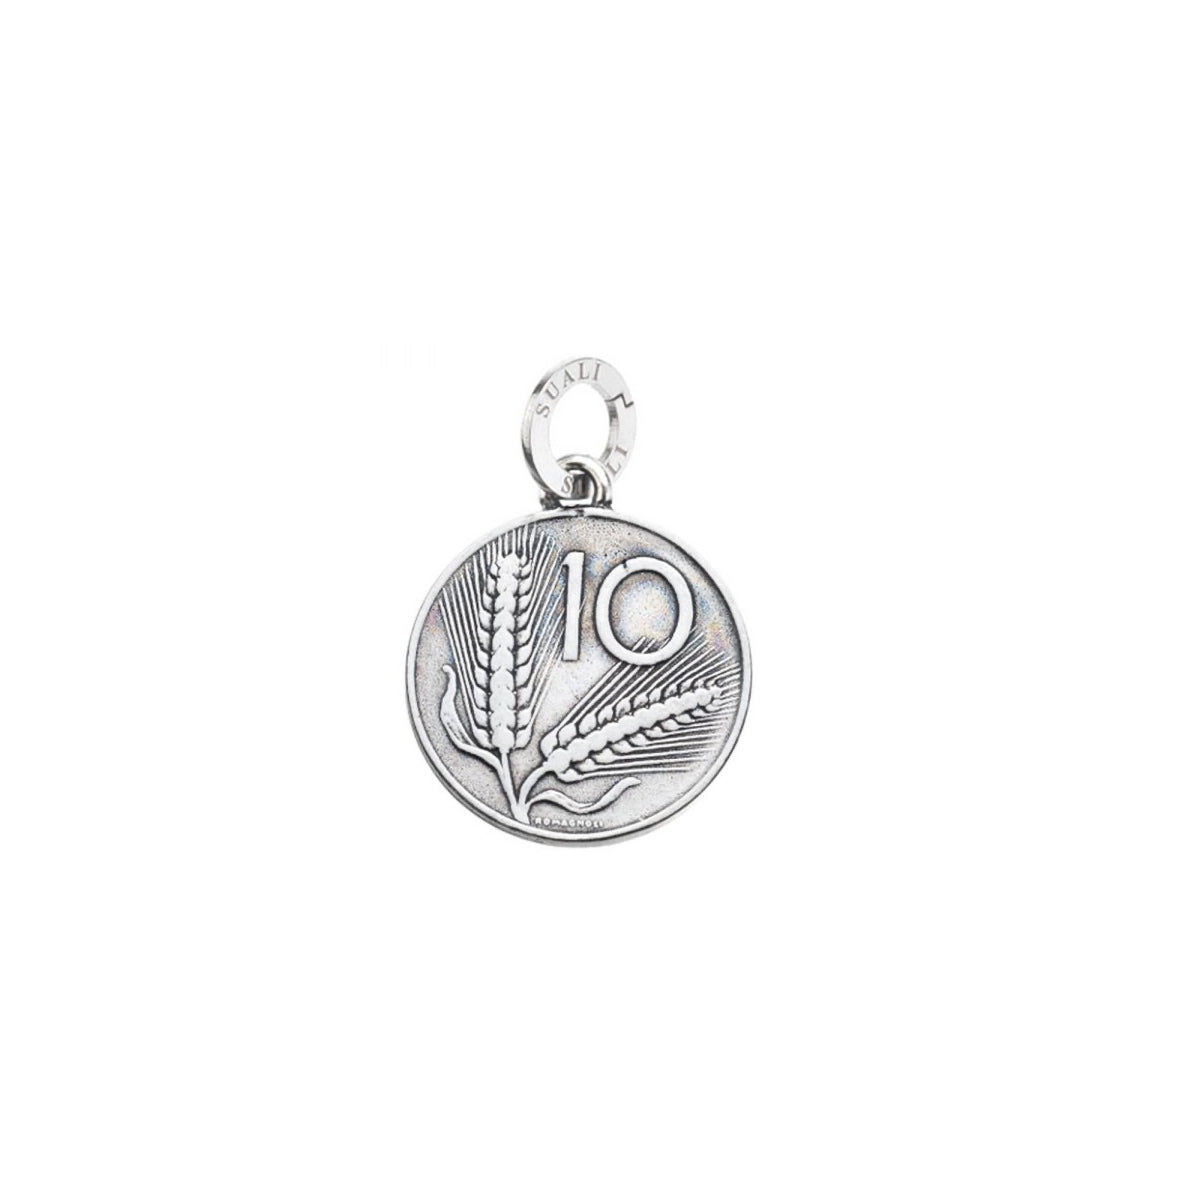 SUALI Charm "10 Lire" in Argento 925